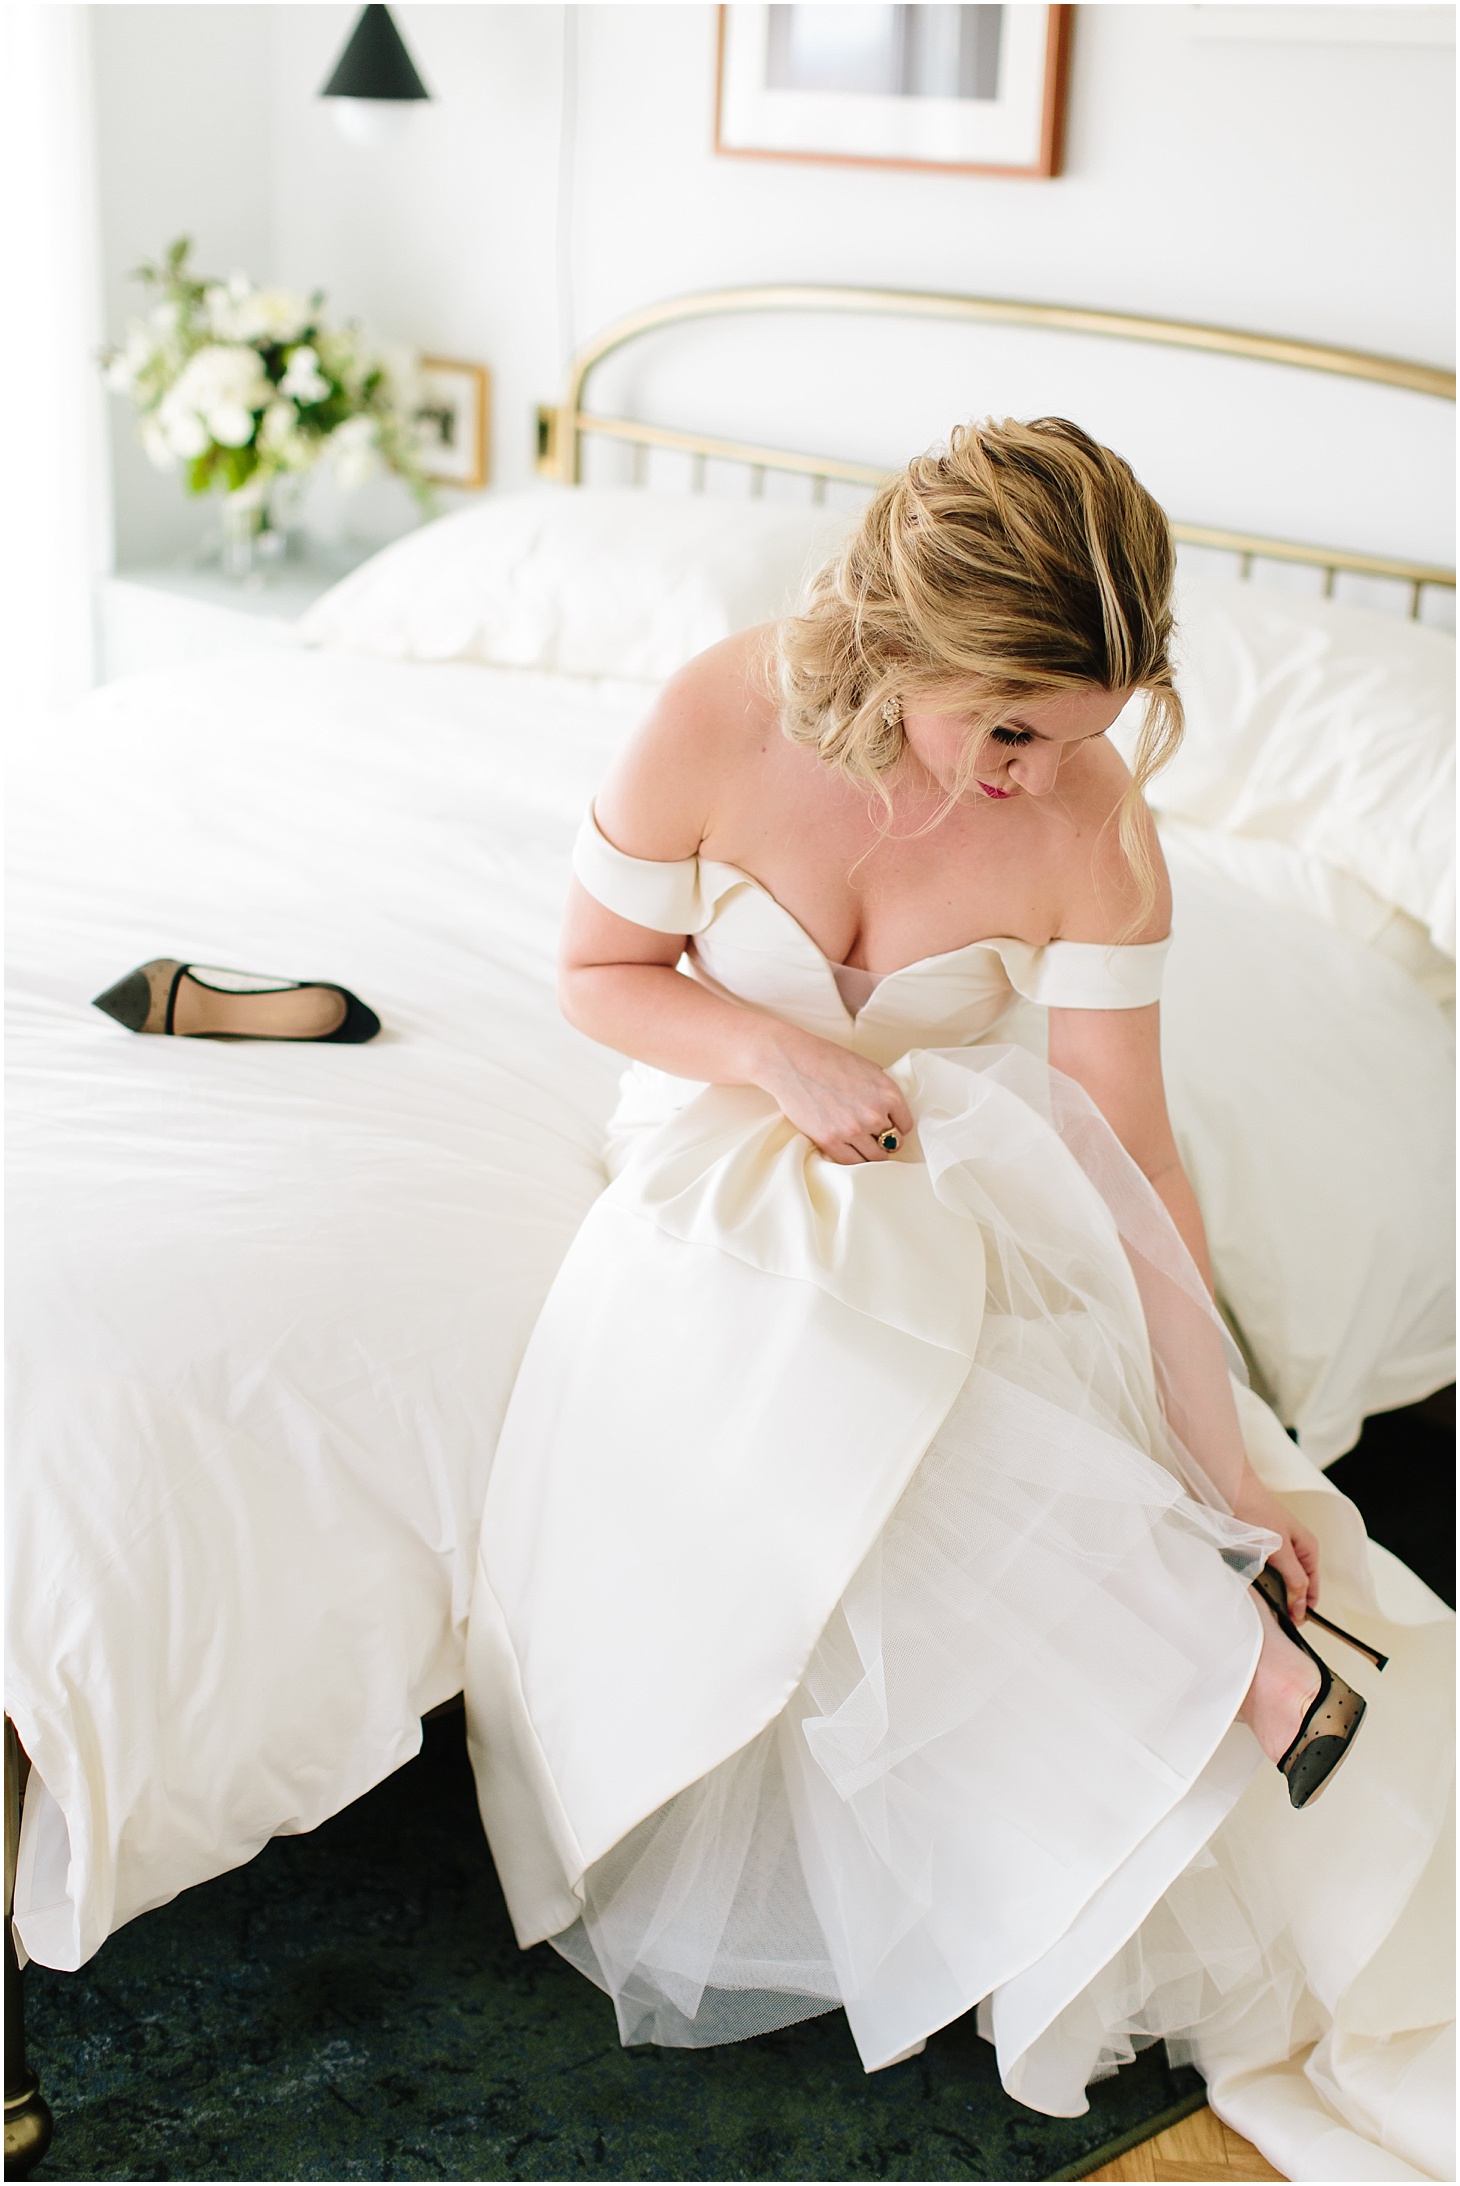 Bride Getting Ready at The LINE Hotel DC, Christian Dior Shoes and Anne Barge Wedding Gown, Modern Spring Wedding at The LINE Hotel DC, Wedding Ceremony at National United Methodist Church, Sarah Bradshaw Photography, DC Wedding Photographer